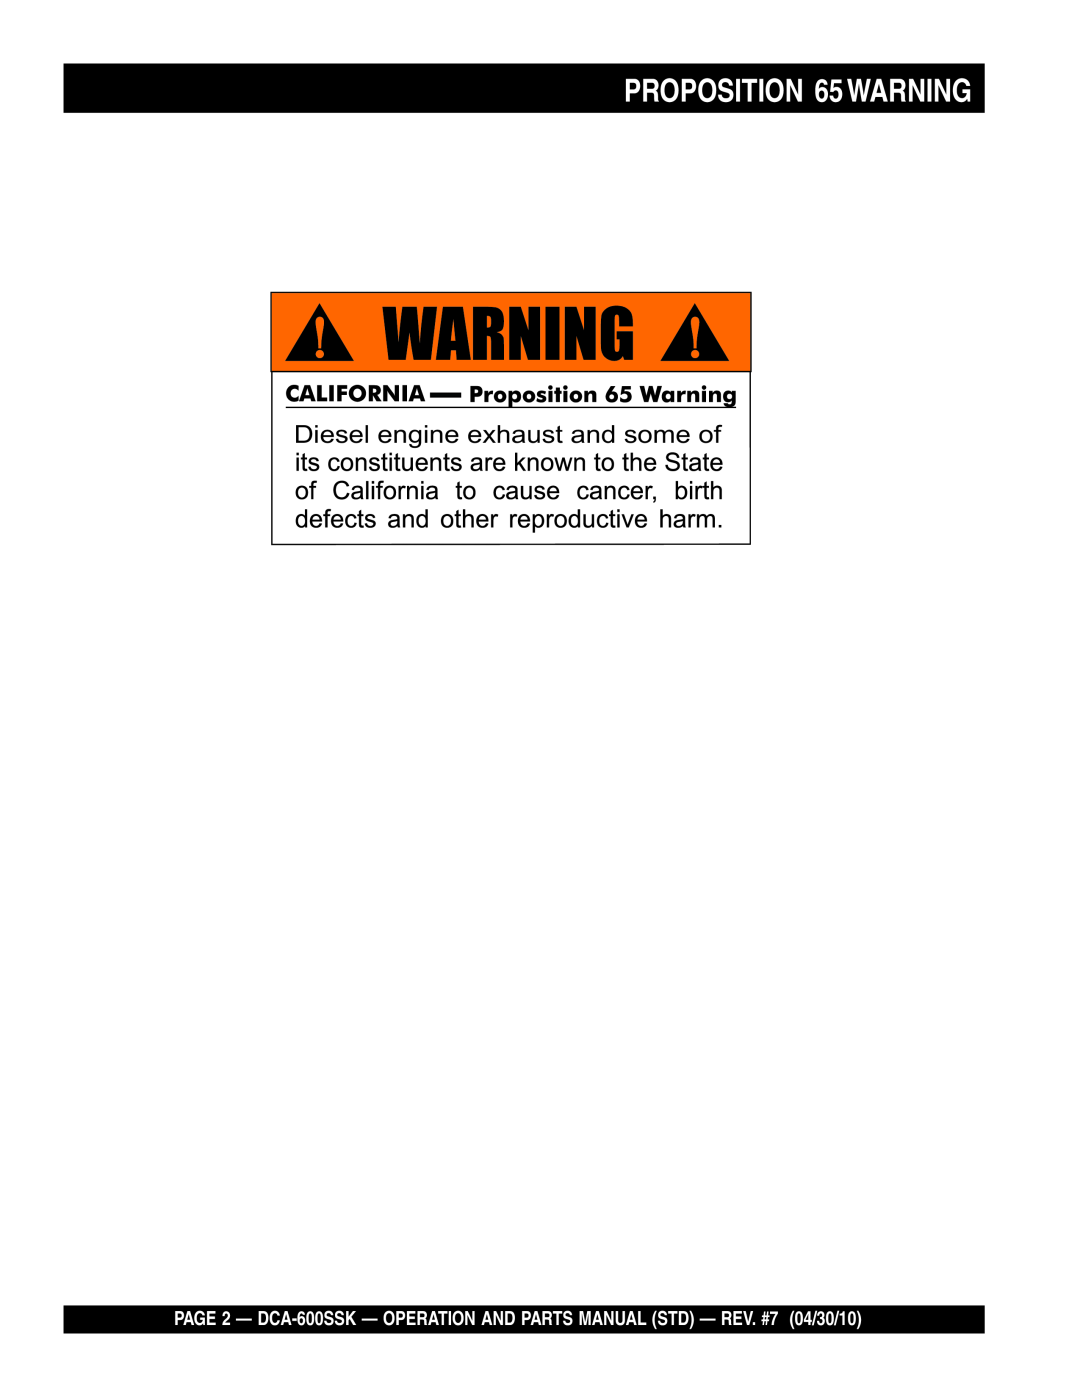 Multiquip DCA-600SSK operation manual PROPOSITION 65WARNING, Diesel engine exhaust and some of 